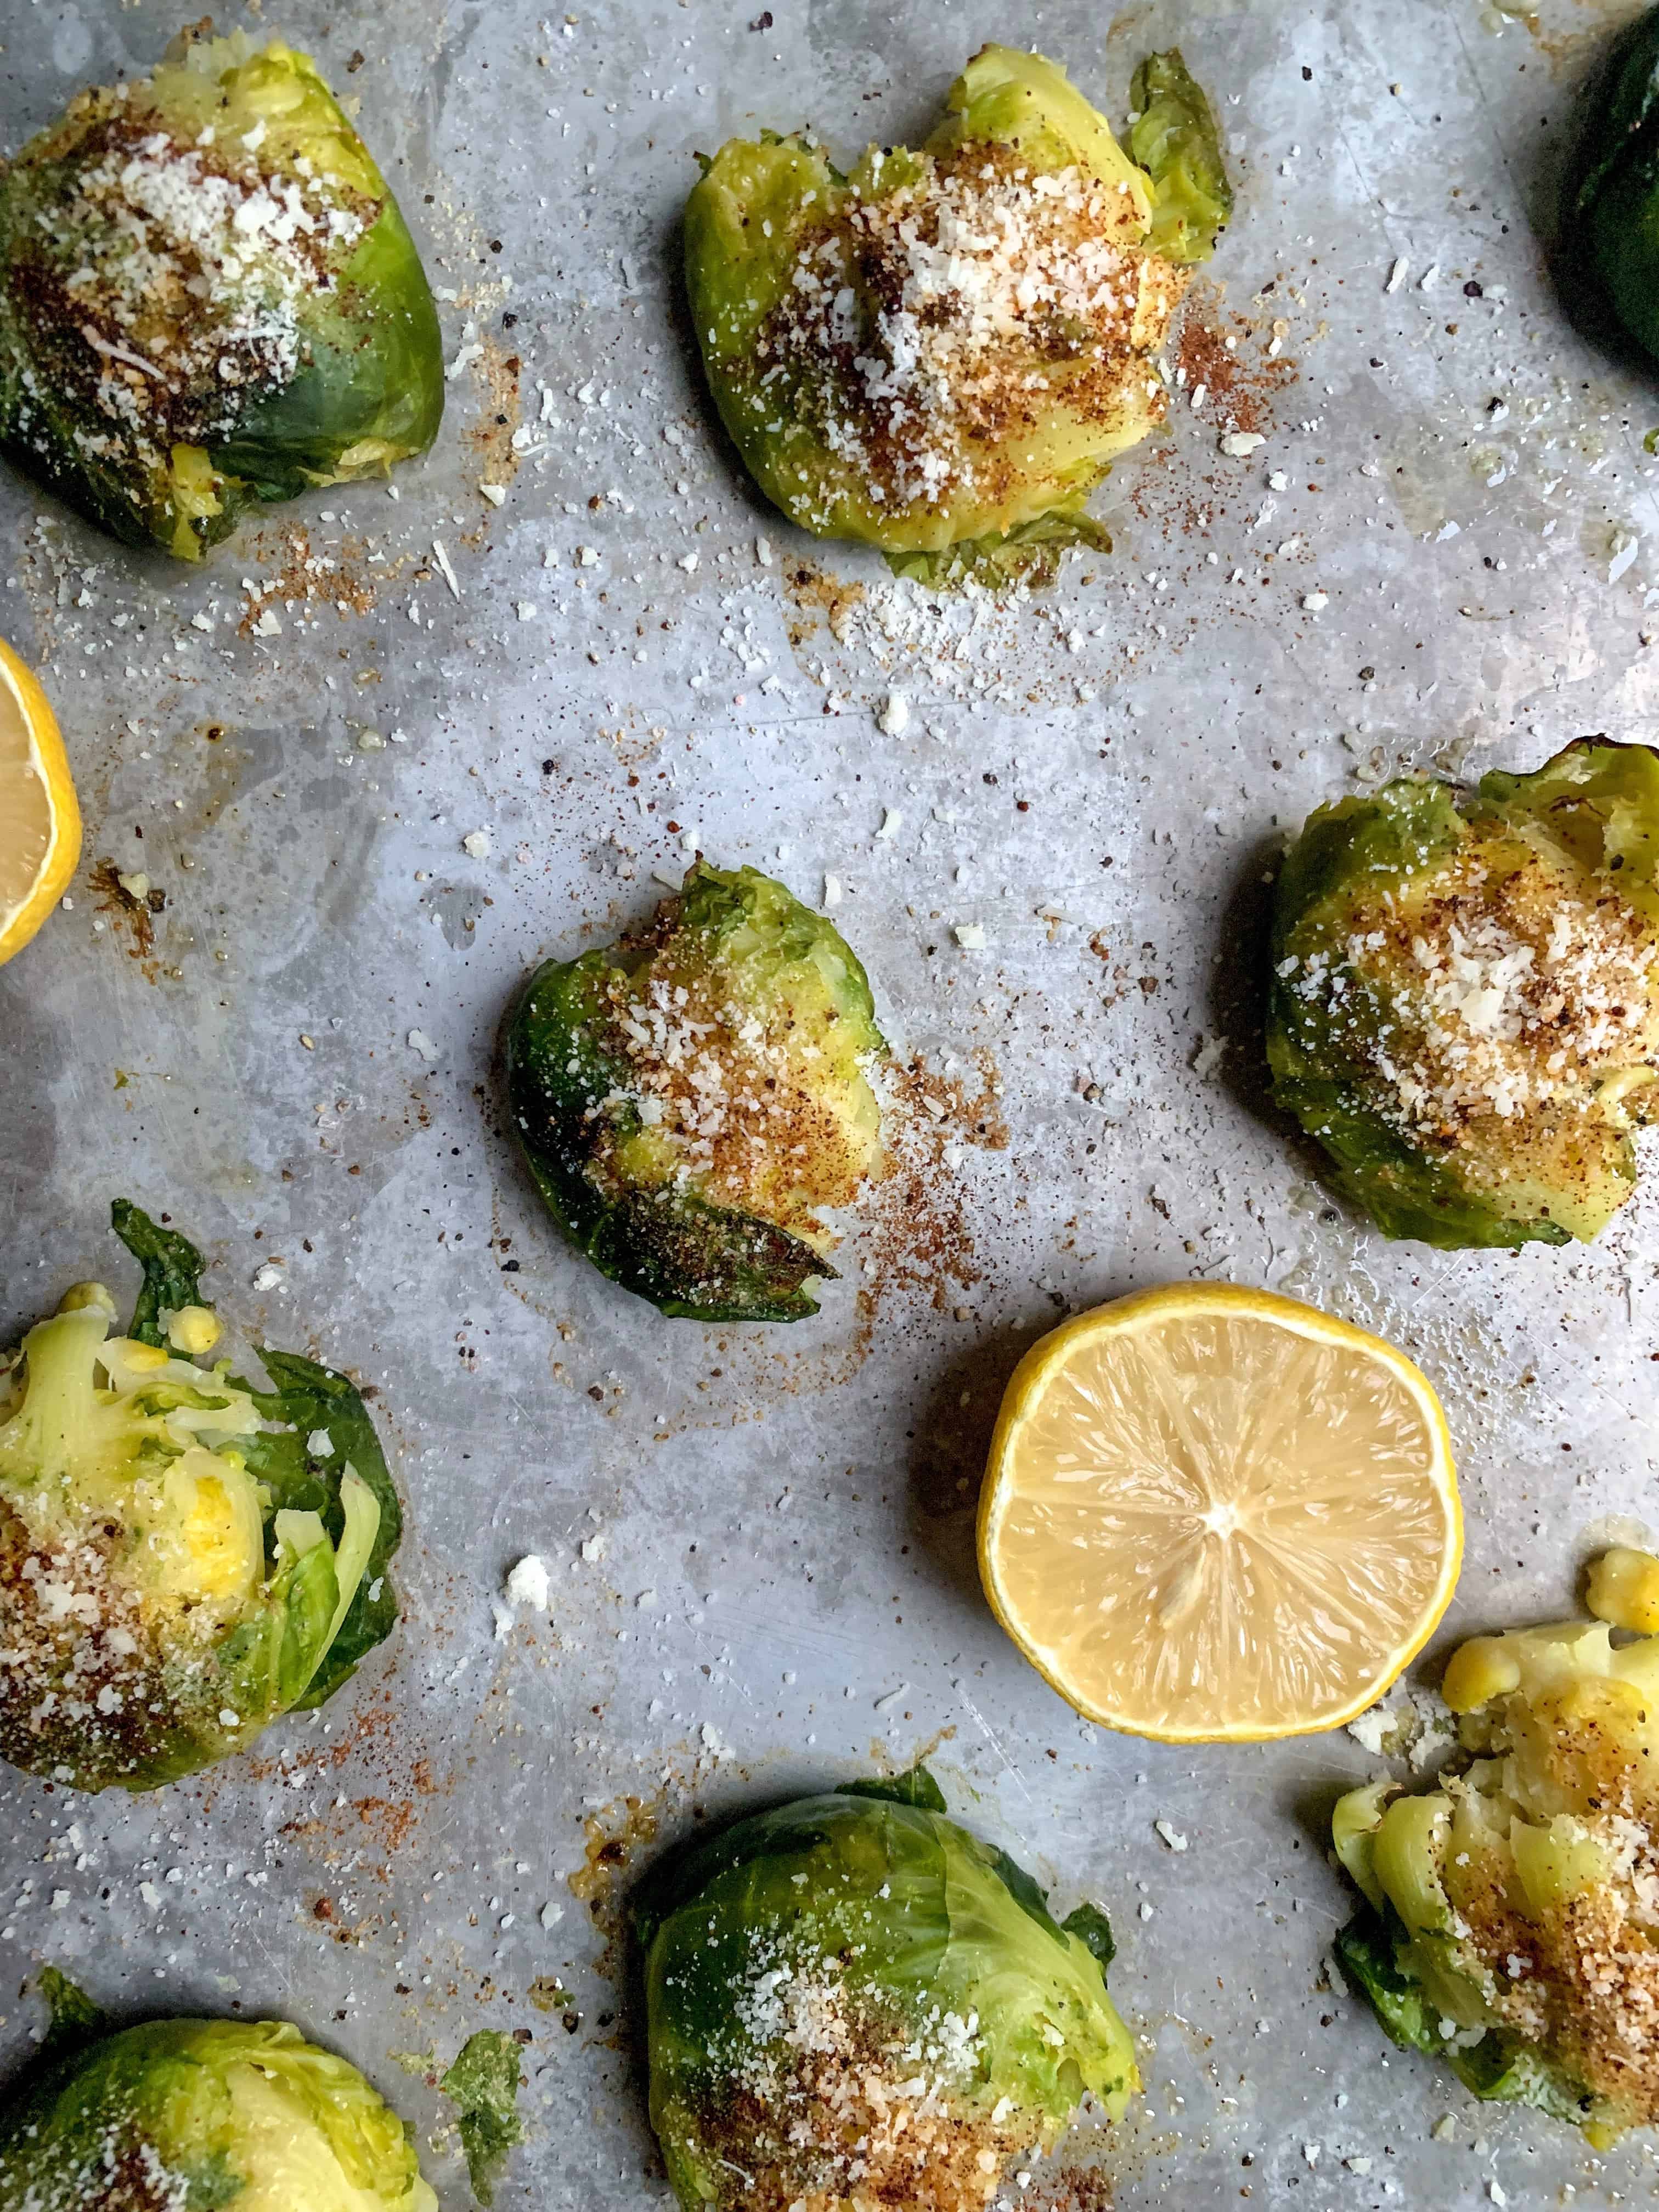 roasted brussels sprouts on sheet pan with half a lemon.